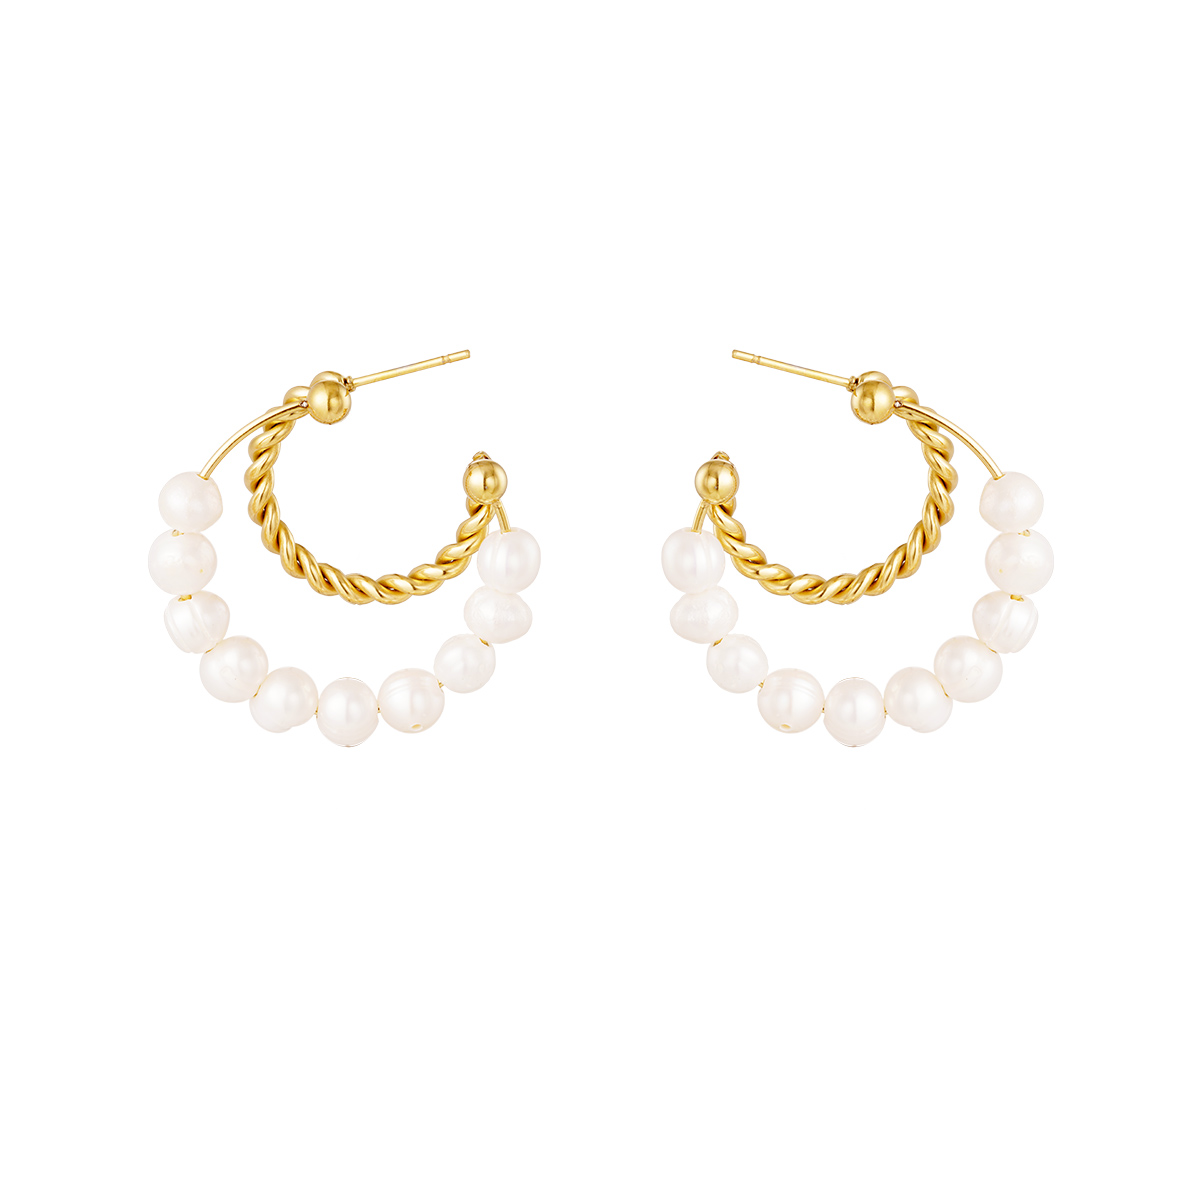 Earrings pearls with a twist